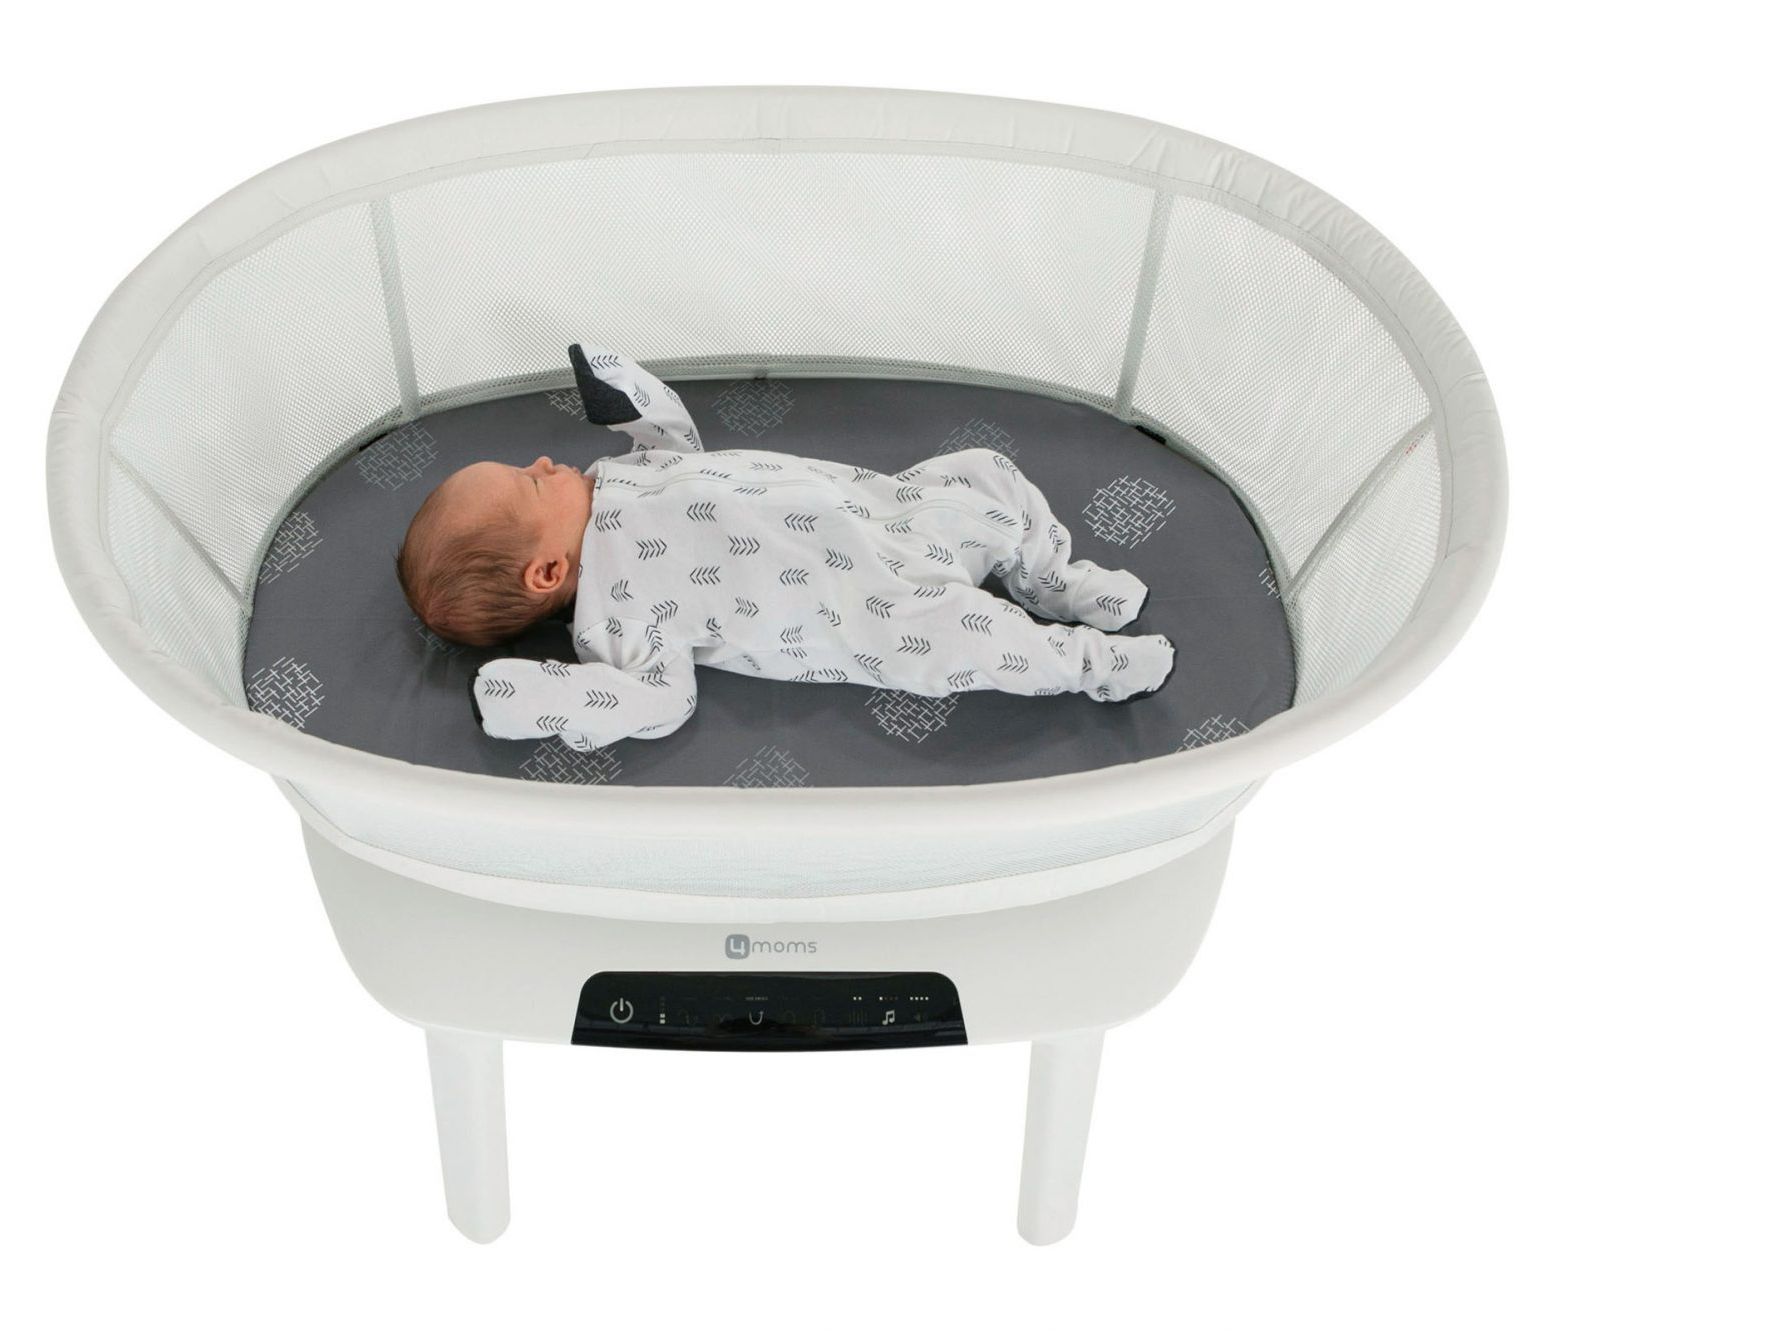 How To Get Baby To Sleep In Bassinet? – Several Useful Tips